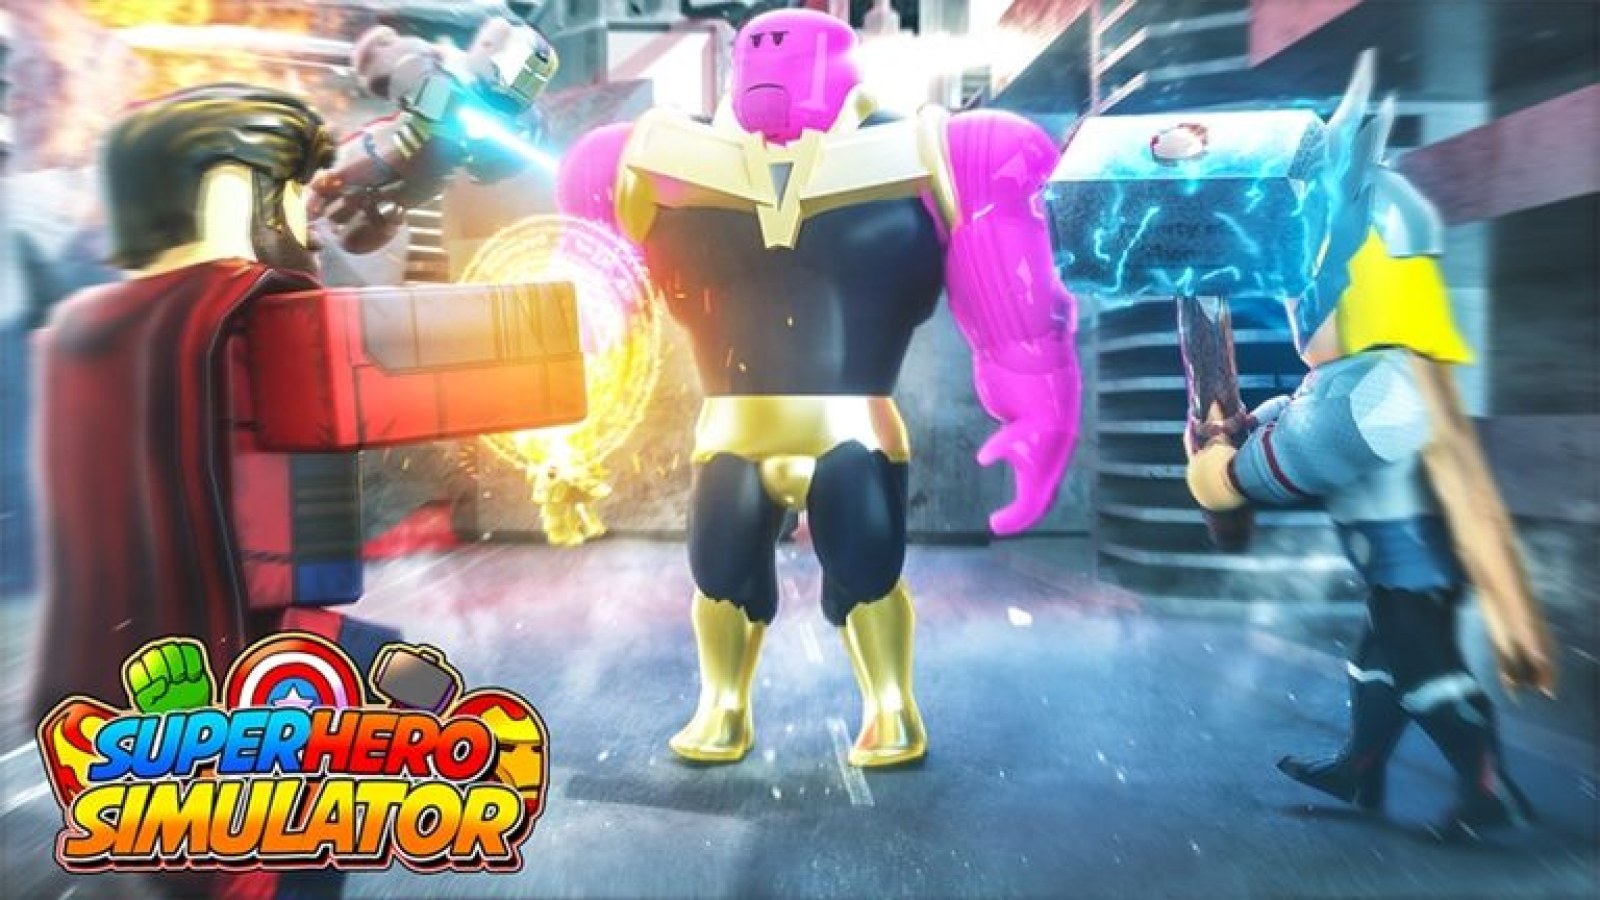 Superhero Simulator Codes All Working Roblox Codes To Get Free Coins - game codes for roblox power simulator